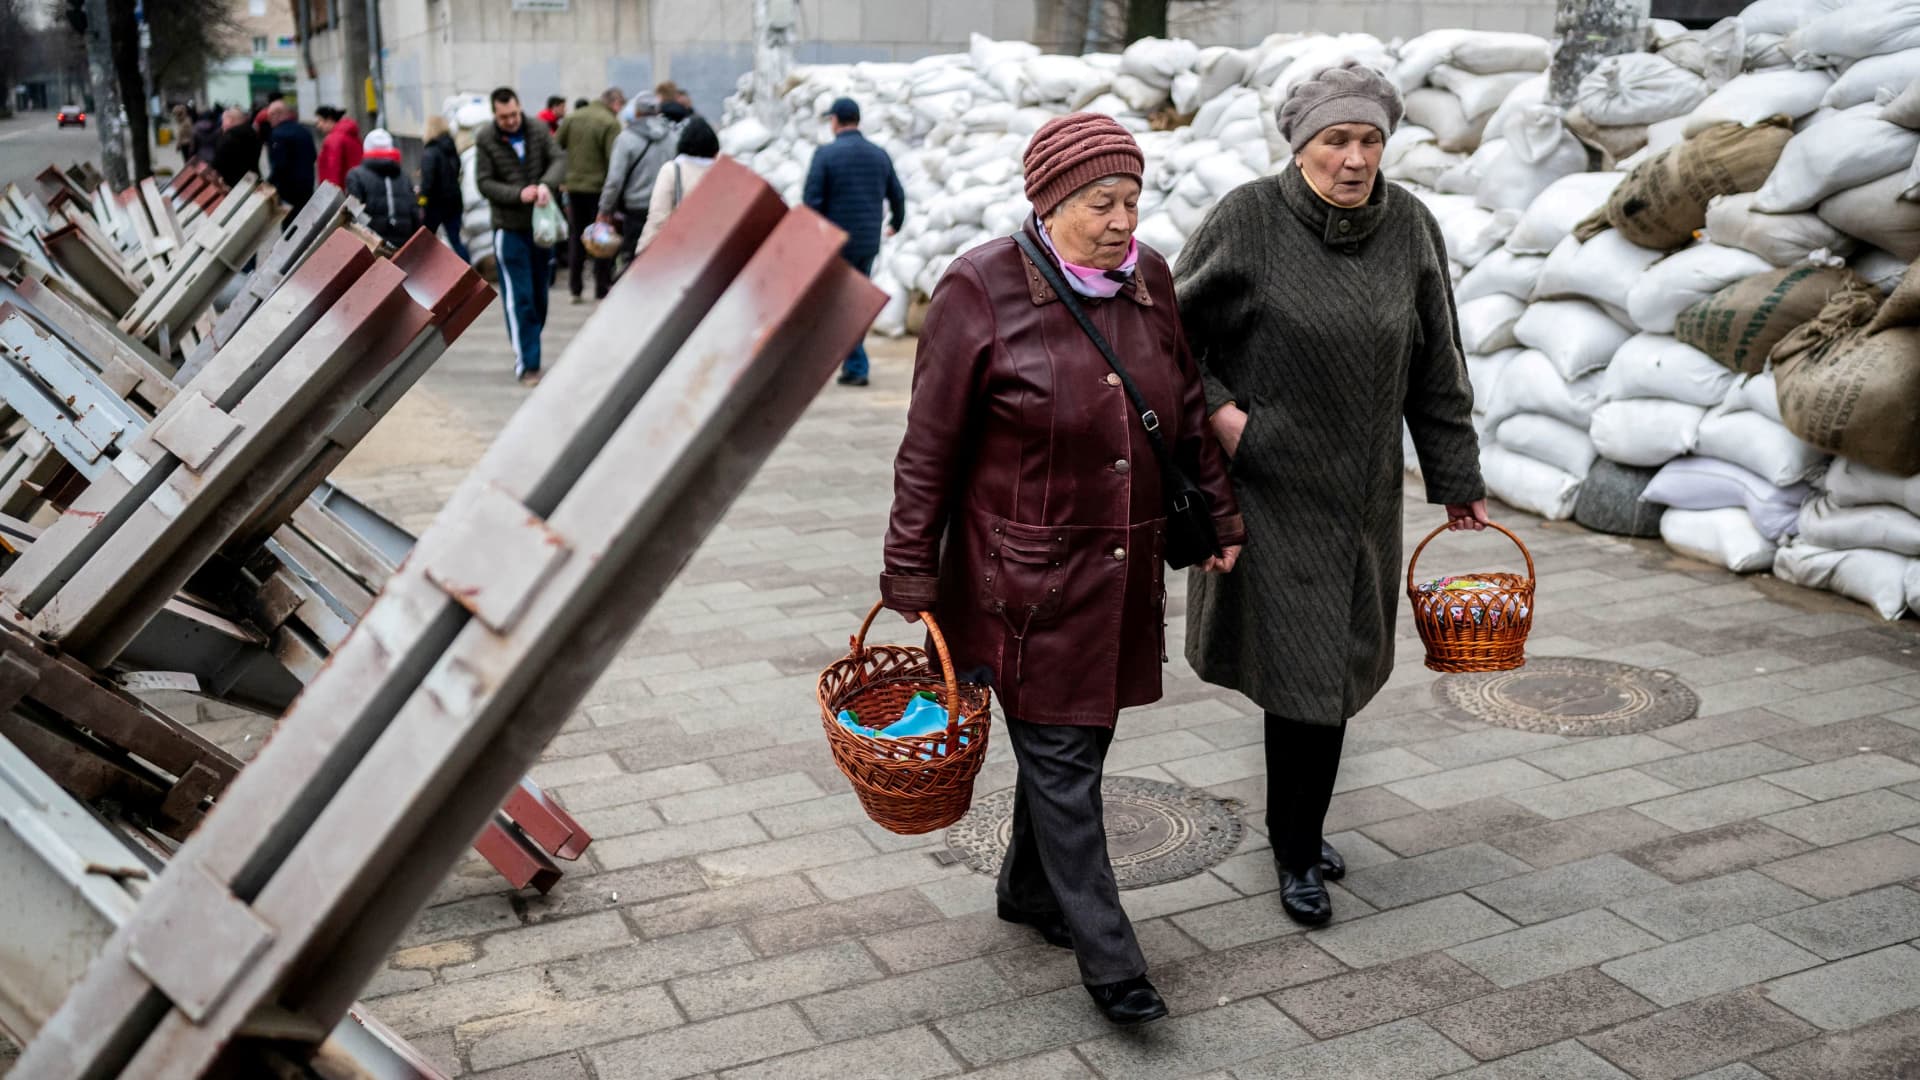 Faithful walk between sandbags and hedgehog anti-tank barricades to attend a blessing of traditional Easter food baskets on Holy Saturday, amid Russia's invasion of Ukraine, in Zhytomyr, Ukraine April 23, 2022.